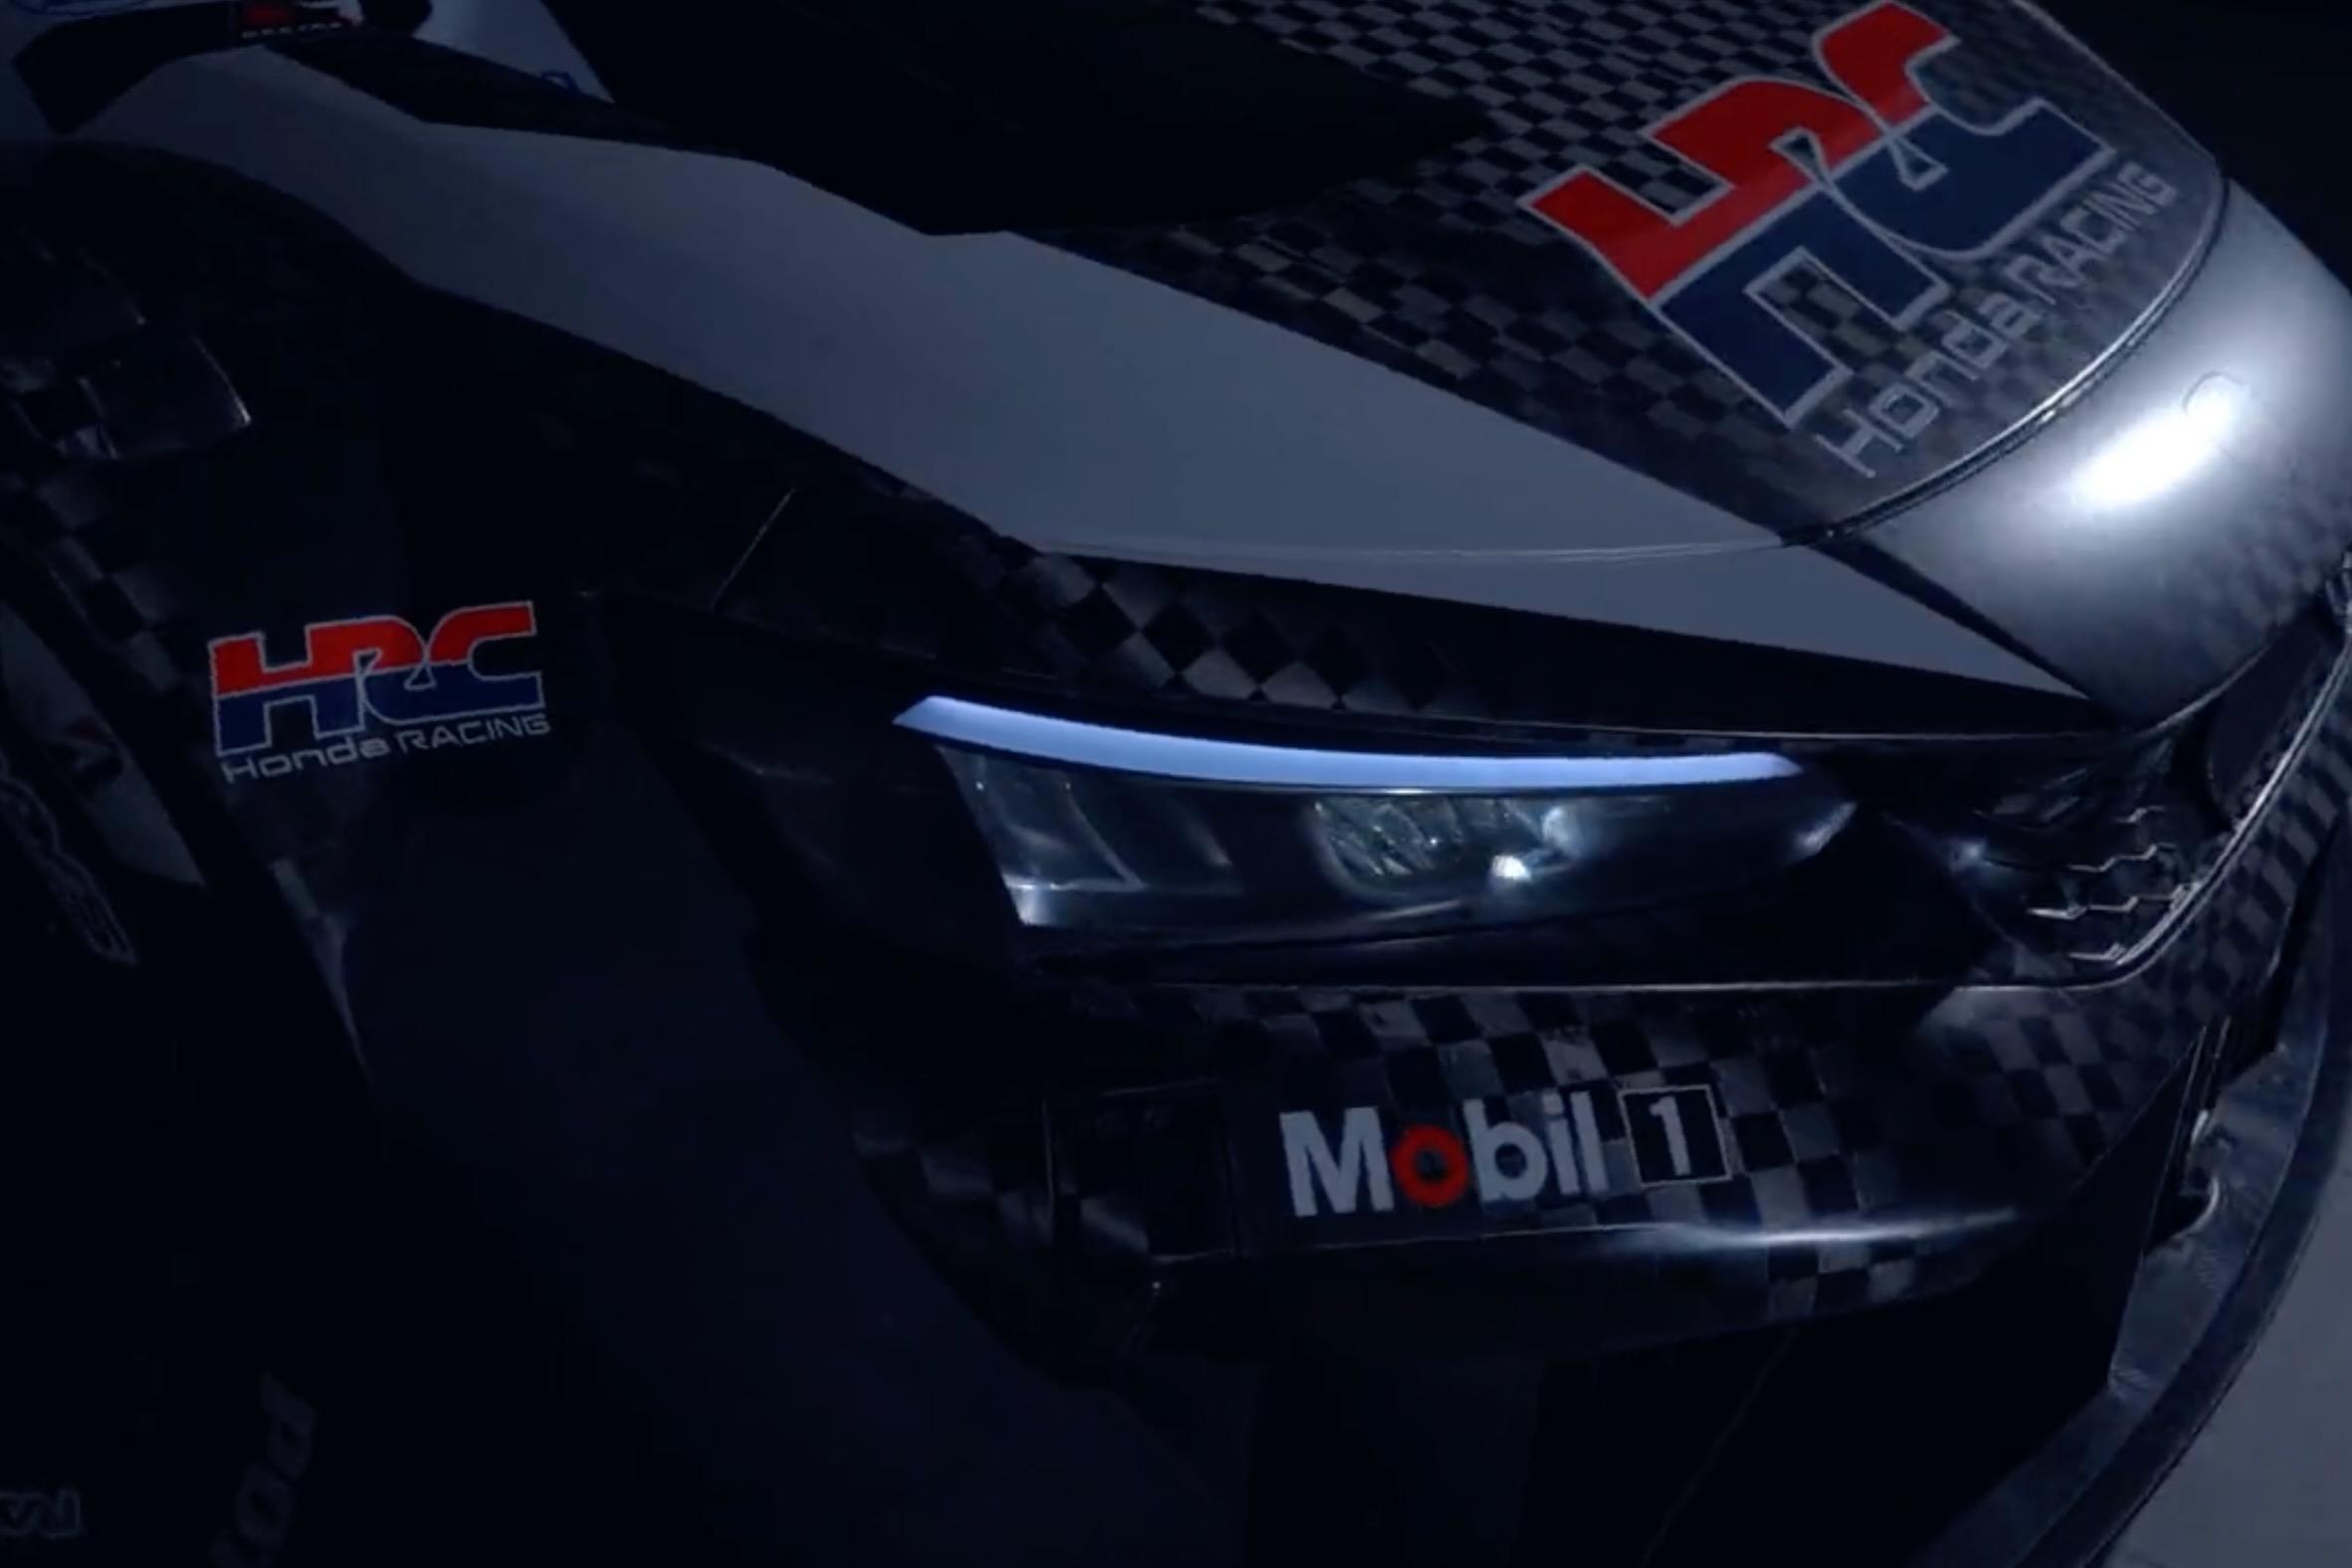 Honda Civic Type R-GT Racecar Gets Ready For First Shakedown Test